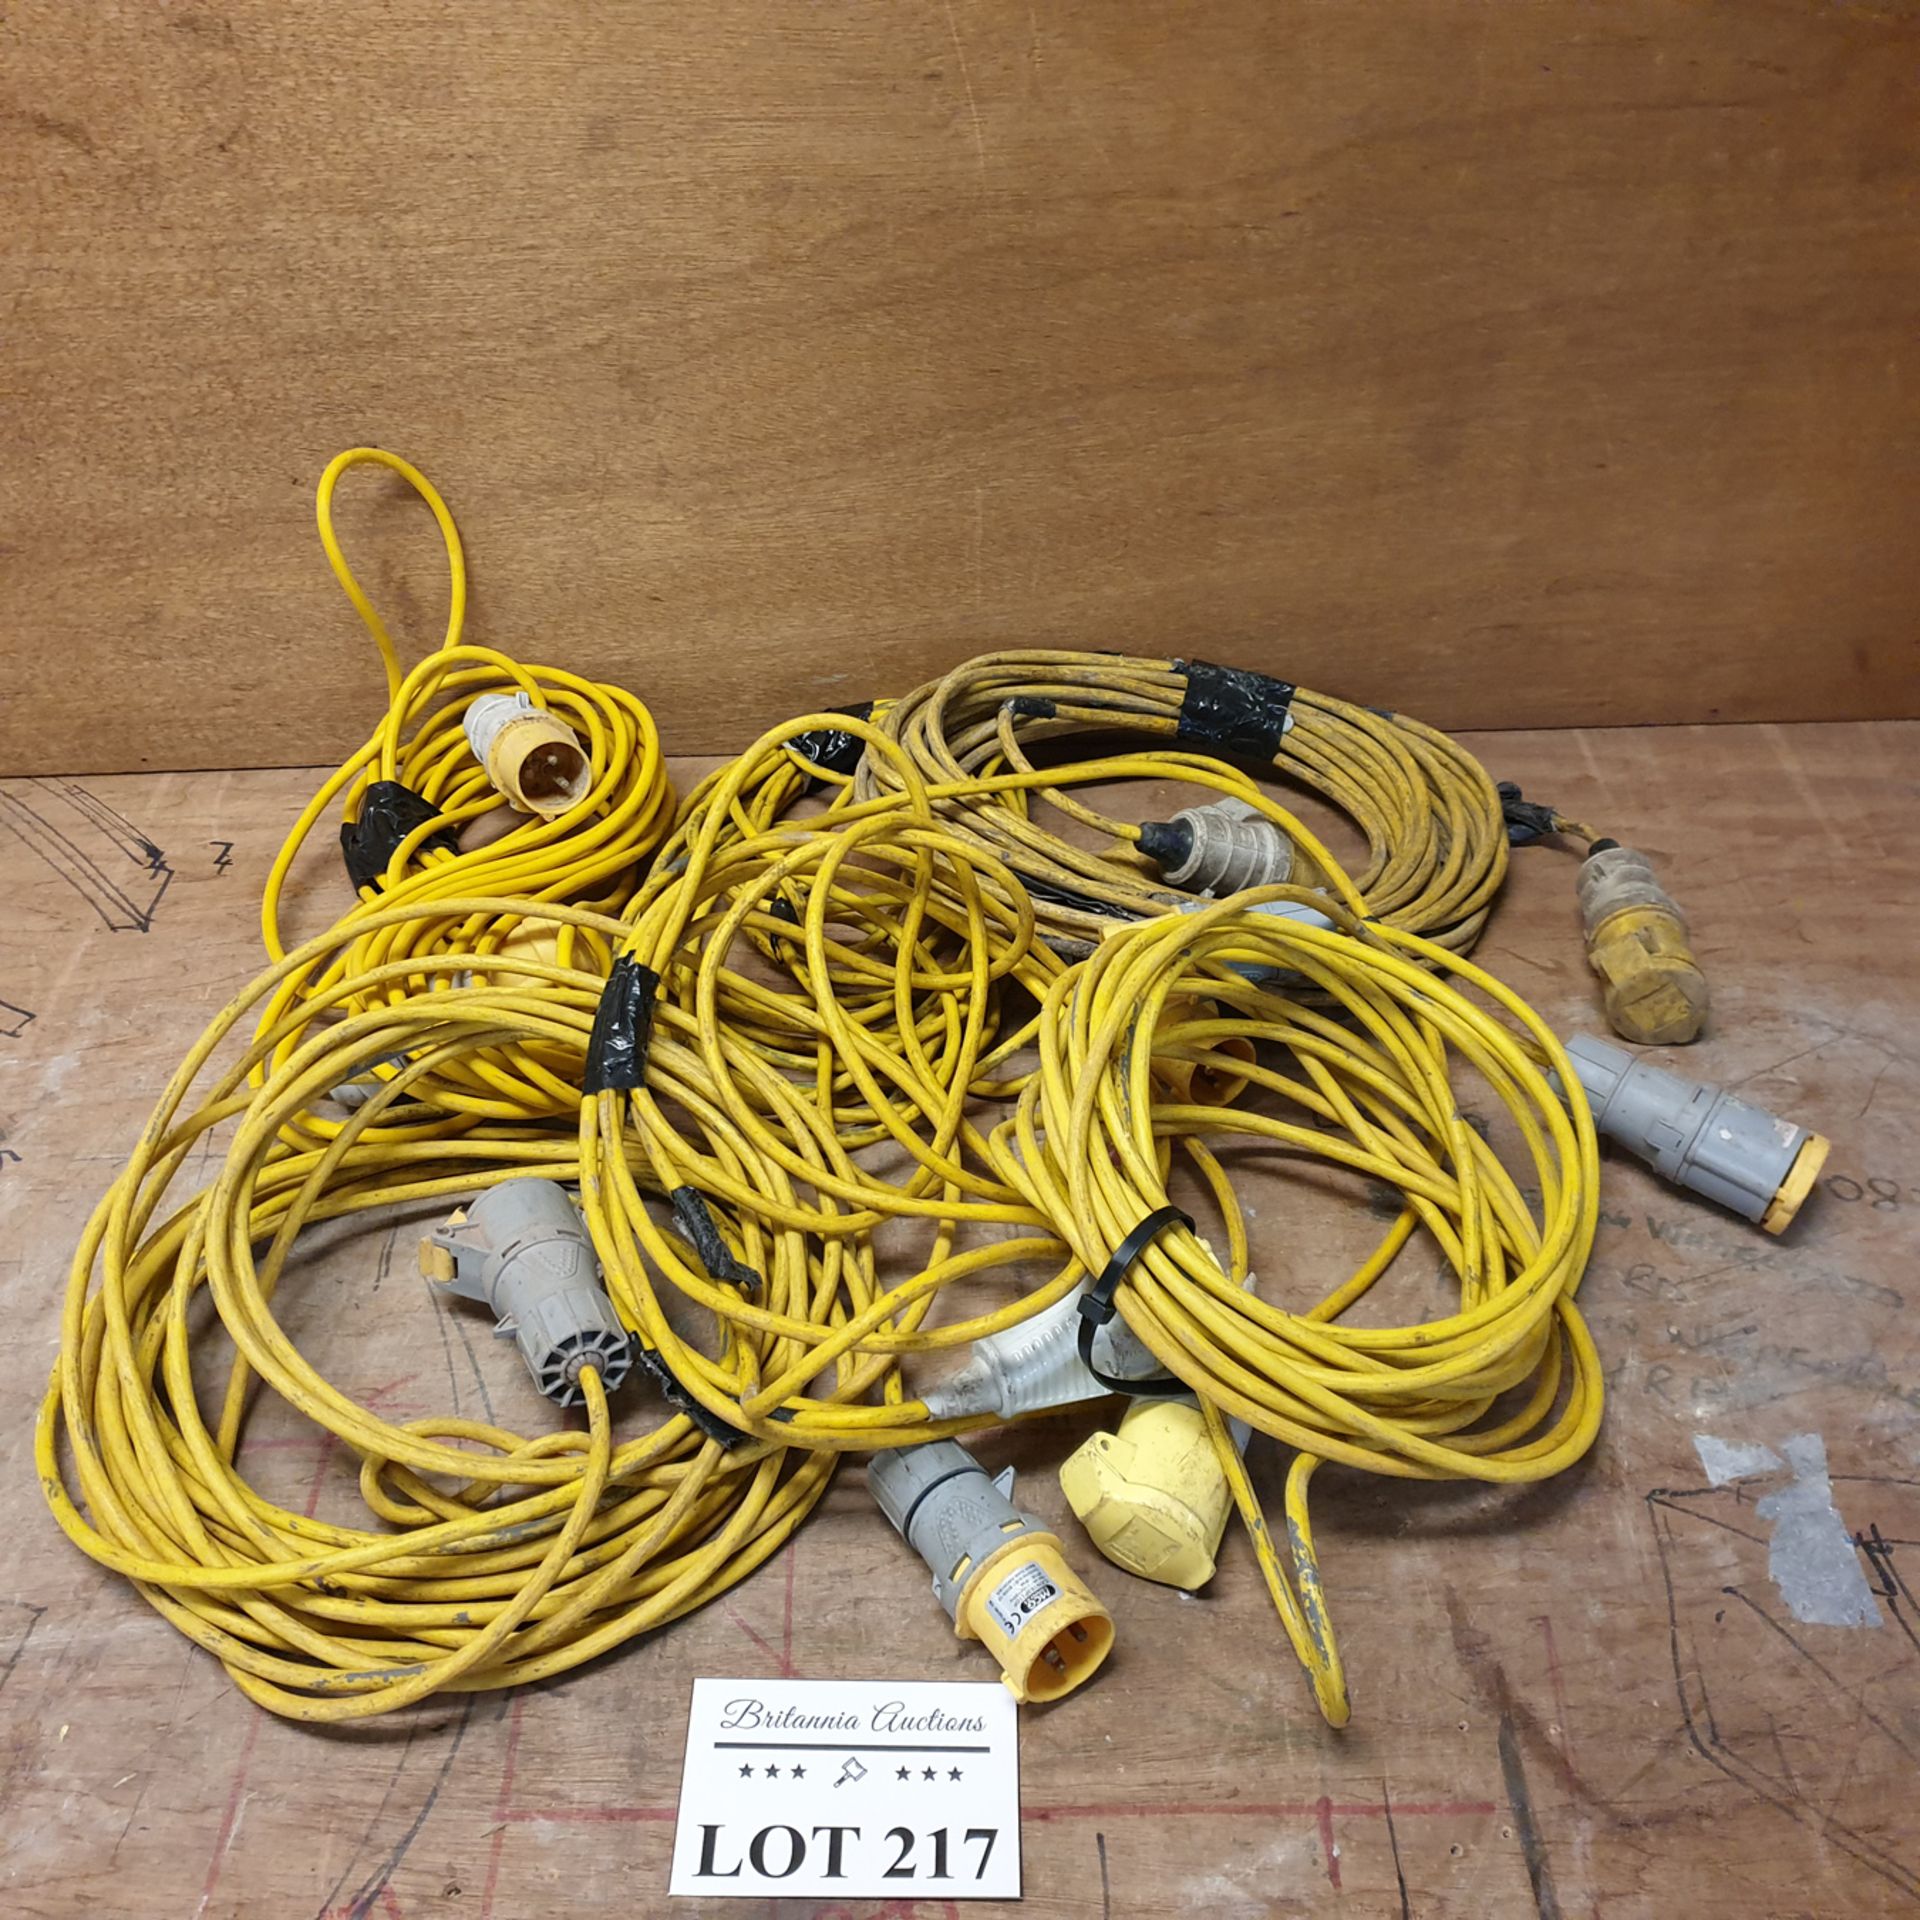 Quantity of 6, 110v Extension Leads.